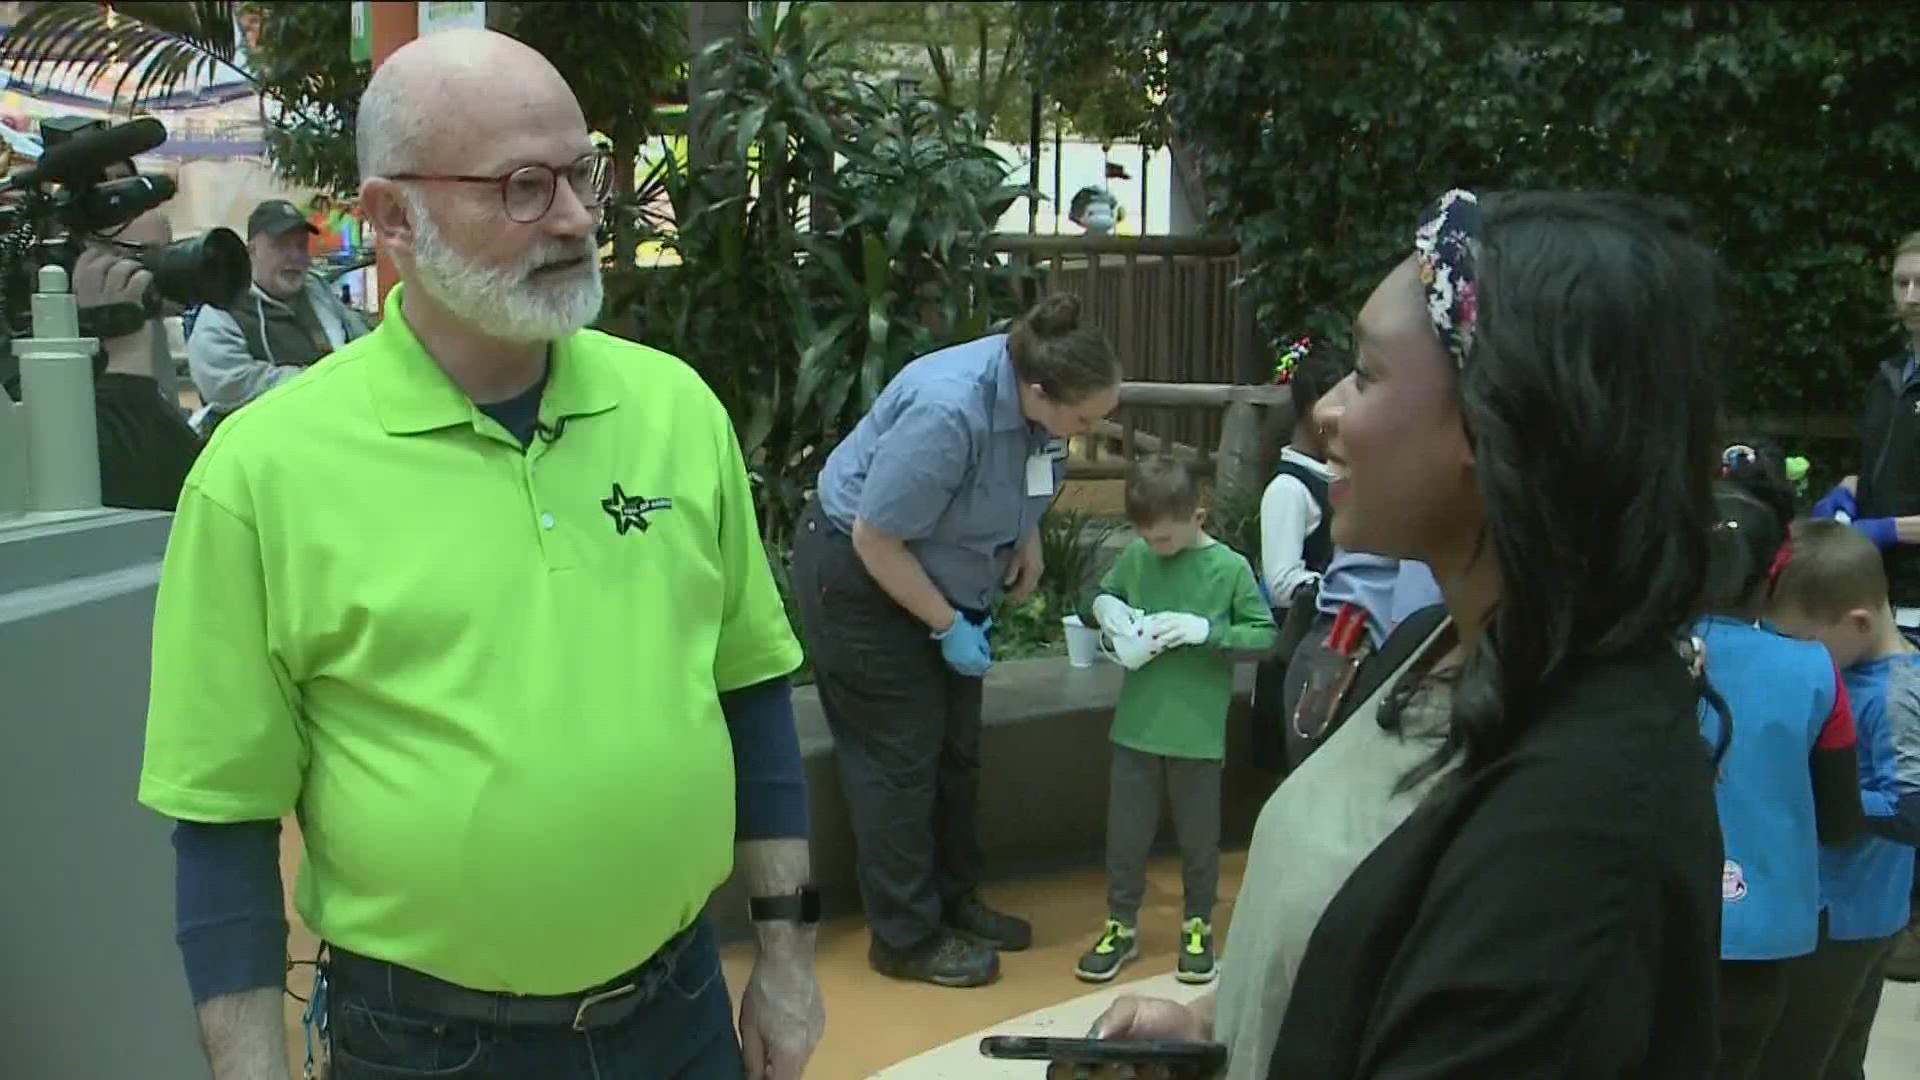 For decades, kids have been releasing lady bugs in the Mall of America to help take care of plants.